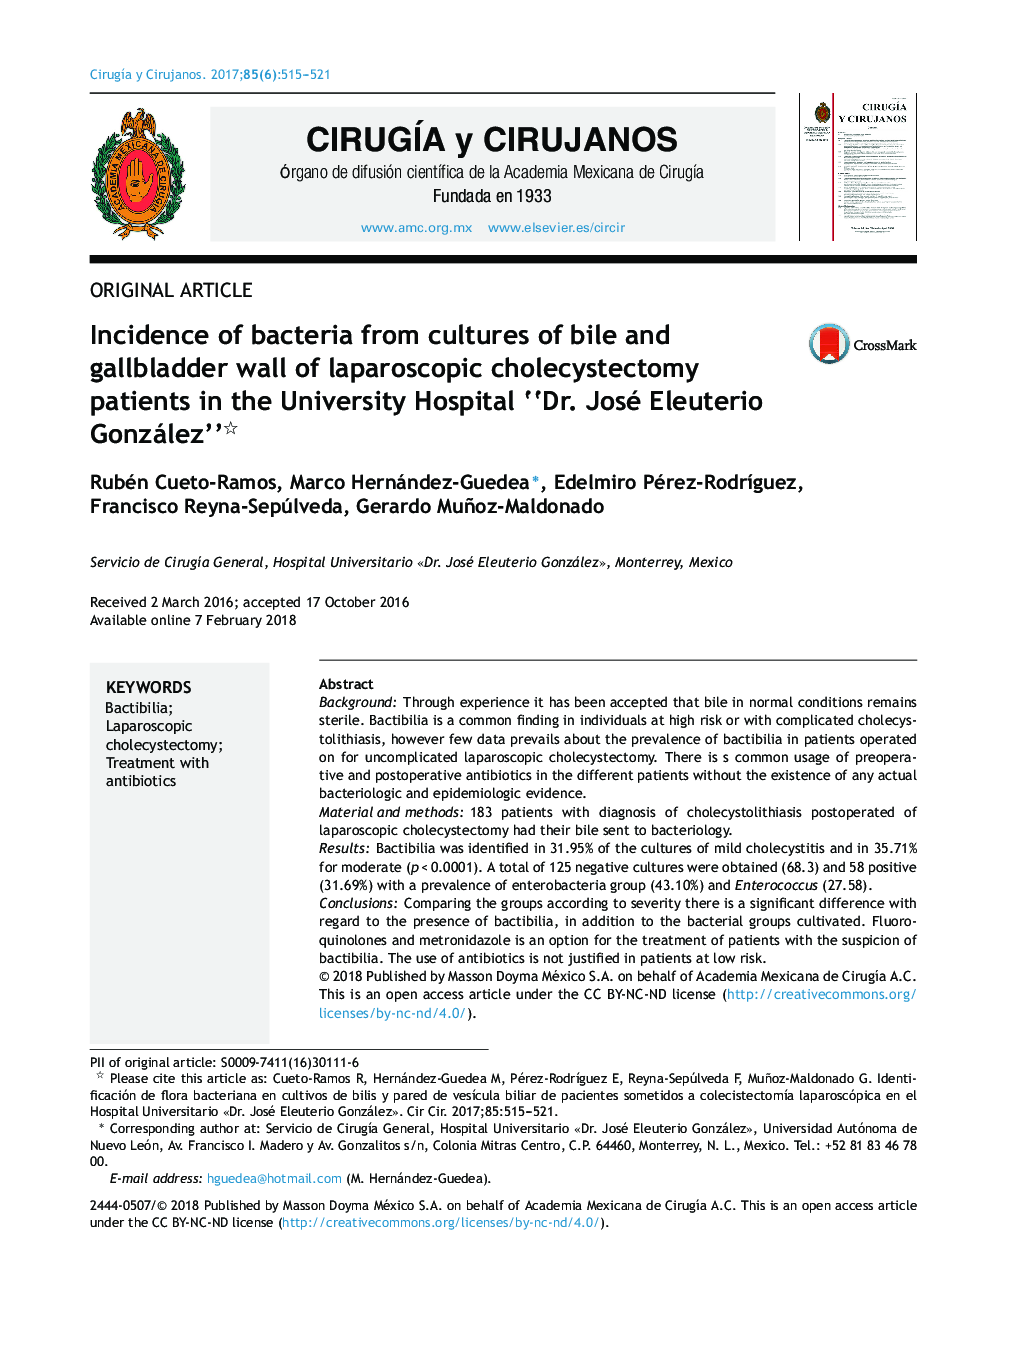 Incidence of bacteria from cultures of bile and gallbladder wall of laparoscopic cholecystectomy patients in the University Hospital “Dr. José Eleuterio González”